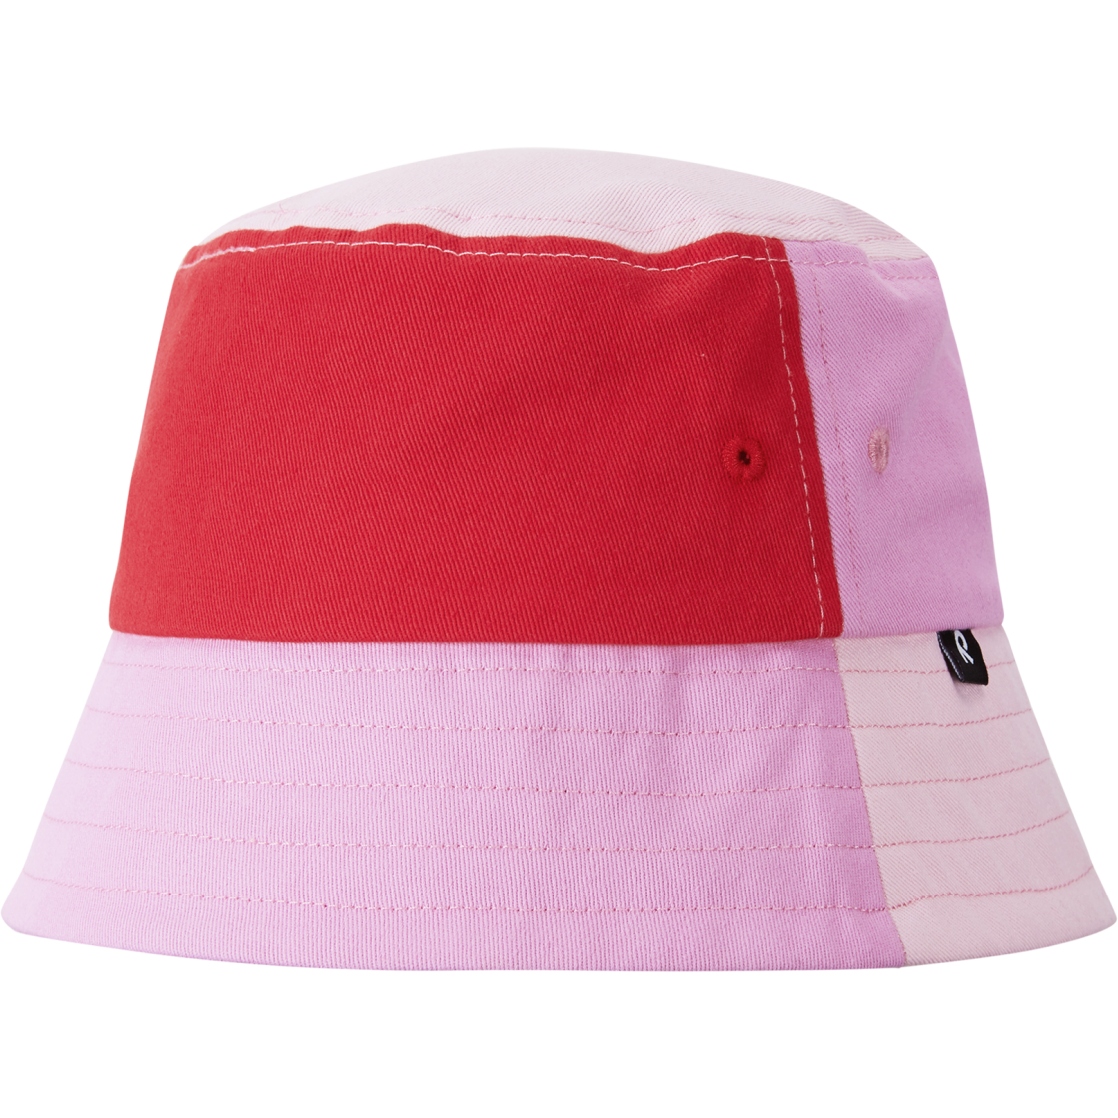 Picture of Reima Siimaa Sunhat Junior - lilac pink 4201